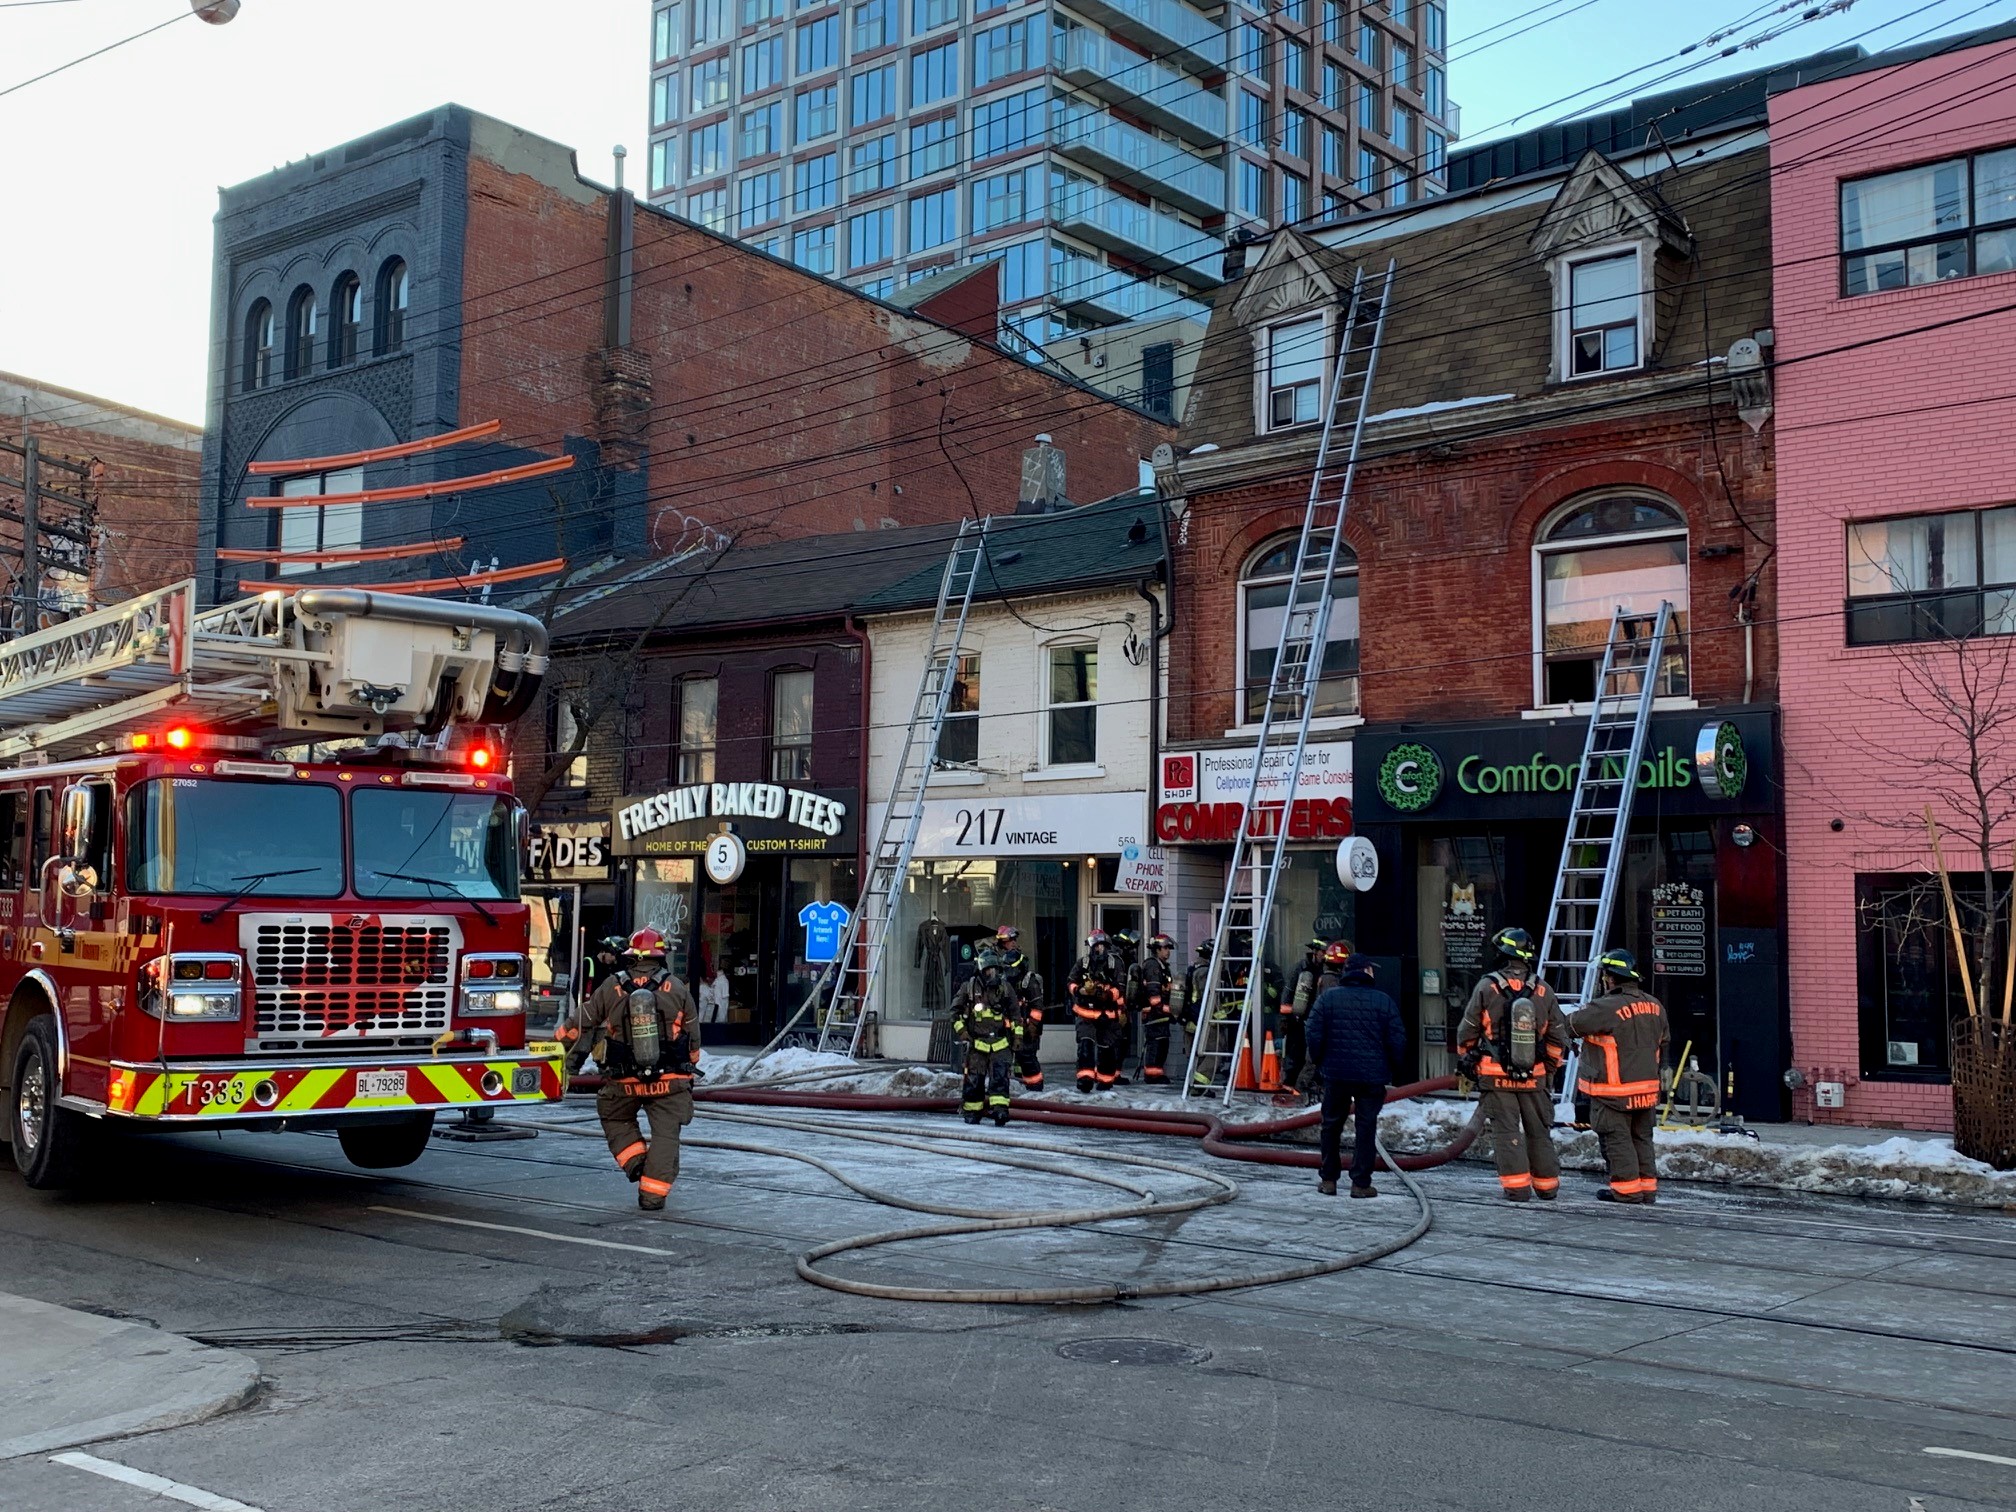 3-alarm fire breaks out at building on Toronto's Queen Street West